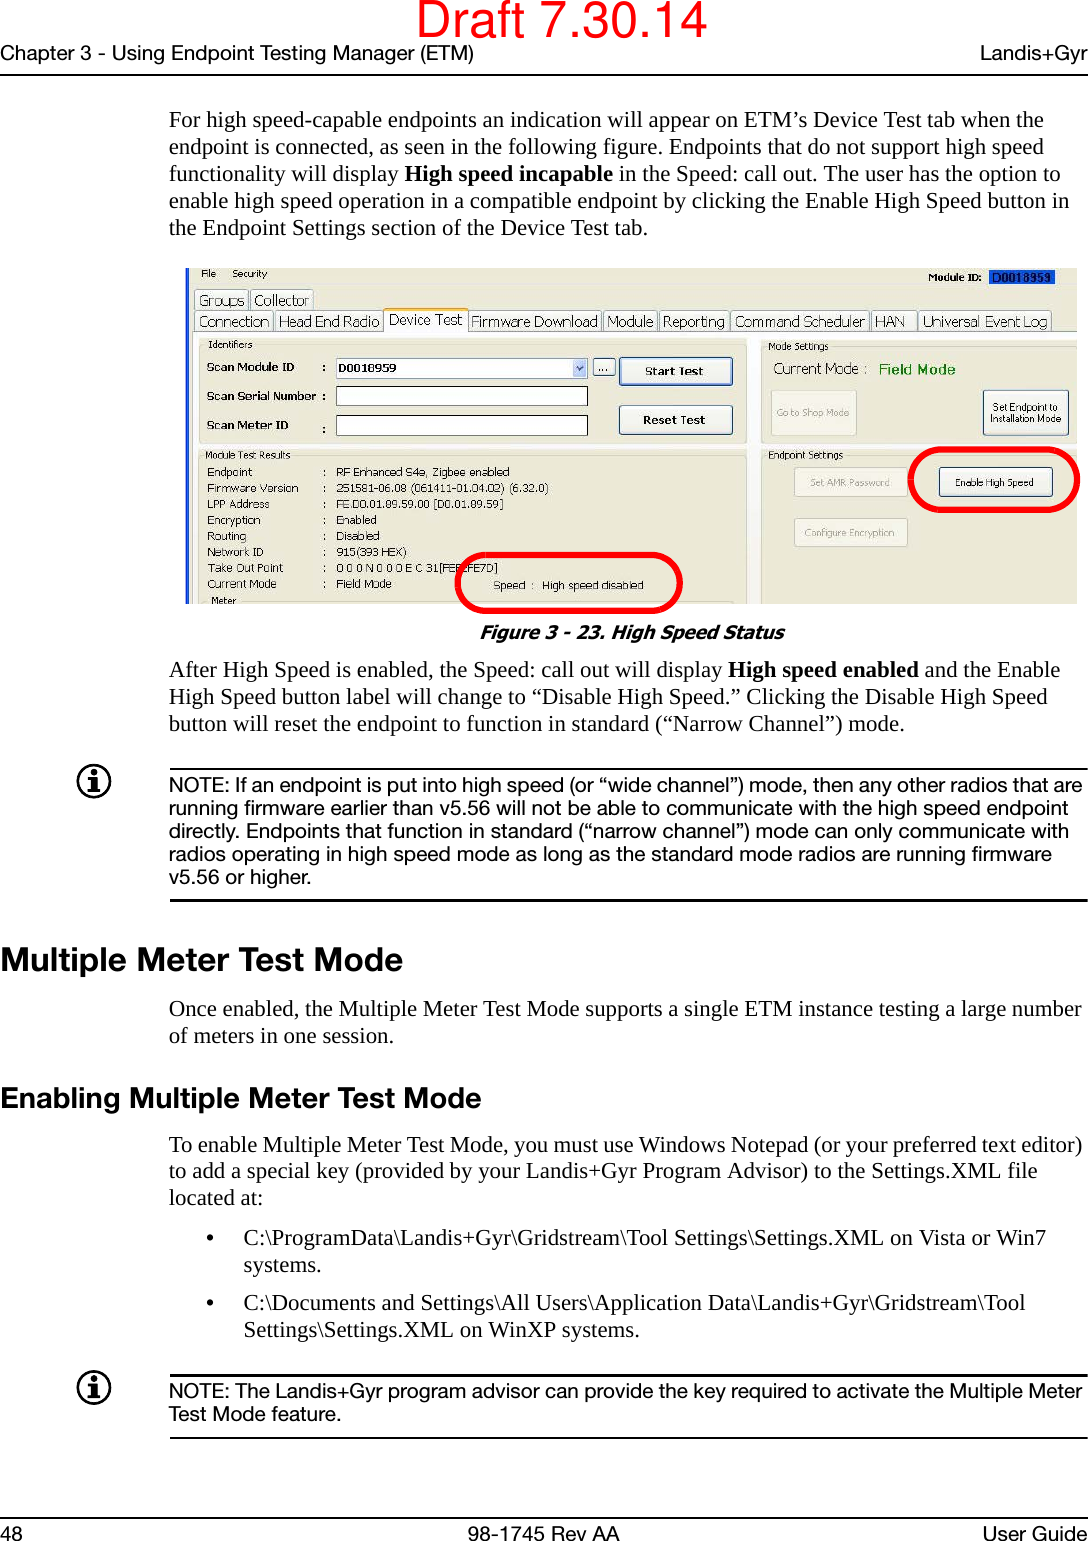 Chapter 3 - Using Endpoint Testing Manager (ETM) Landis+Gyr48 98-1745 Rev AA User GuideFor high speed-capable endpoints an indication will appear on ETM’s Device Test tab when the endpoint is connected, as seen in the following figure. Endpoints that do not support high speed functionality will display High speed incapable in the Speed: call out. The user has the option to enable high speed operation in a compatible endpoint by clicking the Enable High Speed button in the Endpoint Settings section of the Device Test tab. Figure 3 - 23. High Speed StatusAfter High Speed is enabled, the Speed: call out will display High speed enabled and the Enable High Speed button label will change to “Disable High Speed.” Clicking the Disable High Speed button will reset the endpoint to function in standard (“Narrow Channel”) mode.NOTE: If an endpoint is put into high speed (or “wide channel”) mode, then any other radios that are running firmware earlier than v5.56 will not be able to communicate with the high speed endpoint directly. Endpoints that function in standard (“narrow channel”) mode can only communicate with radios operating in high speed mode as long as the standard mode radios are running firmware v5.56 or higher.Multiple Meter Test ModeOnce enabled, the Multiple Meter Test Mode supports a single ETM instance testing a large number of meters in one session. Enabling Multiple Meter Test ModeTo enable Multiple Meter Test Mode, you must use Windows Notepad (or your preferred text editor) to add a special key (provided by your Landis+Gyr Program Advisor) to the Settings.XML file located at: •C:\ProgramData\Landis+Gyr\Gridstream\Tool Settings\Settings.XML on Vista or Win7 systems.•C:\Documents and Settings\All Users\Application Data\Landis+Gyr\Gridstream\Tool Settings\Settings.XML on WinXP systems.NOTE: The Landis+Gyr program advisor can provide the key required to activate the Multiple Meter Test Mode feature.Draft 7.30.14